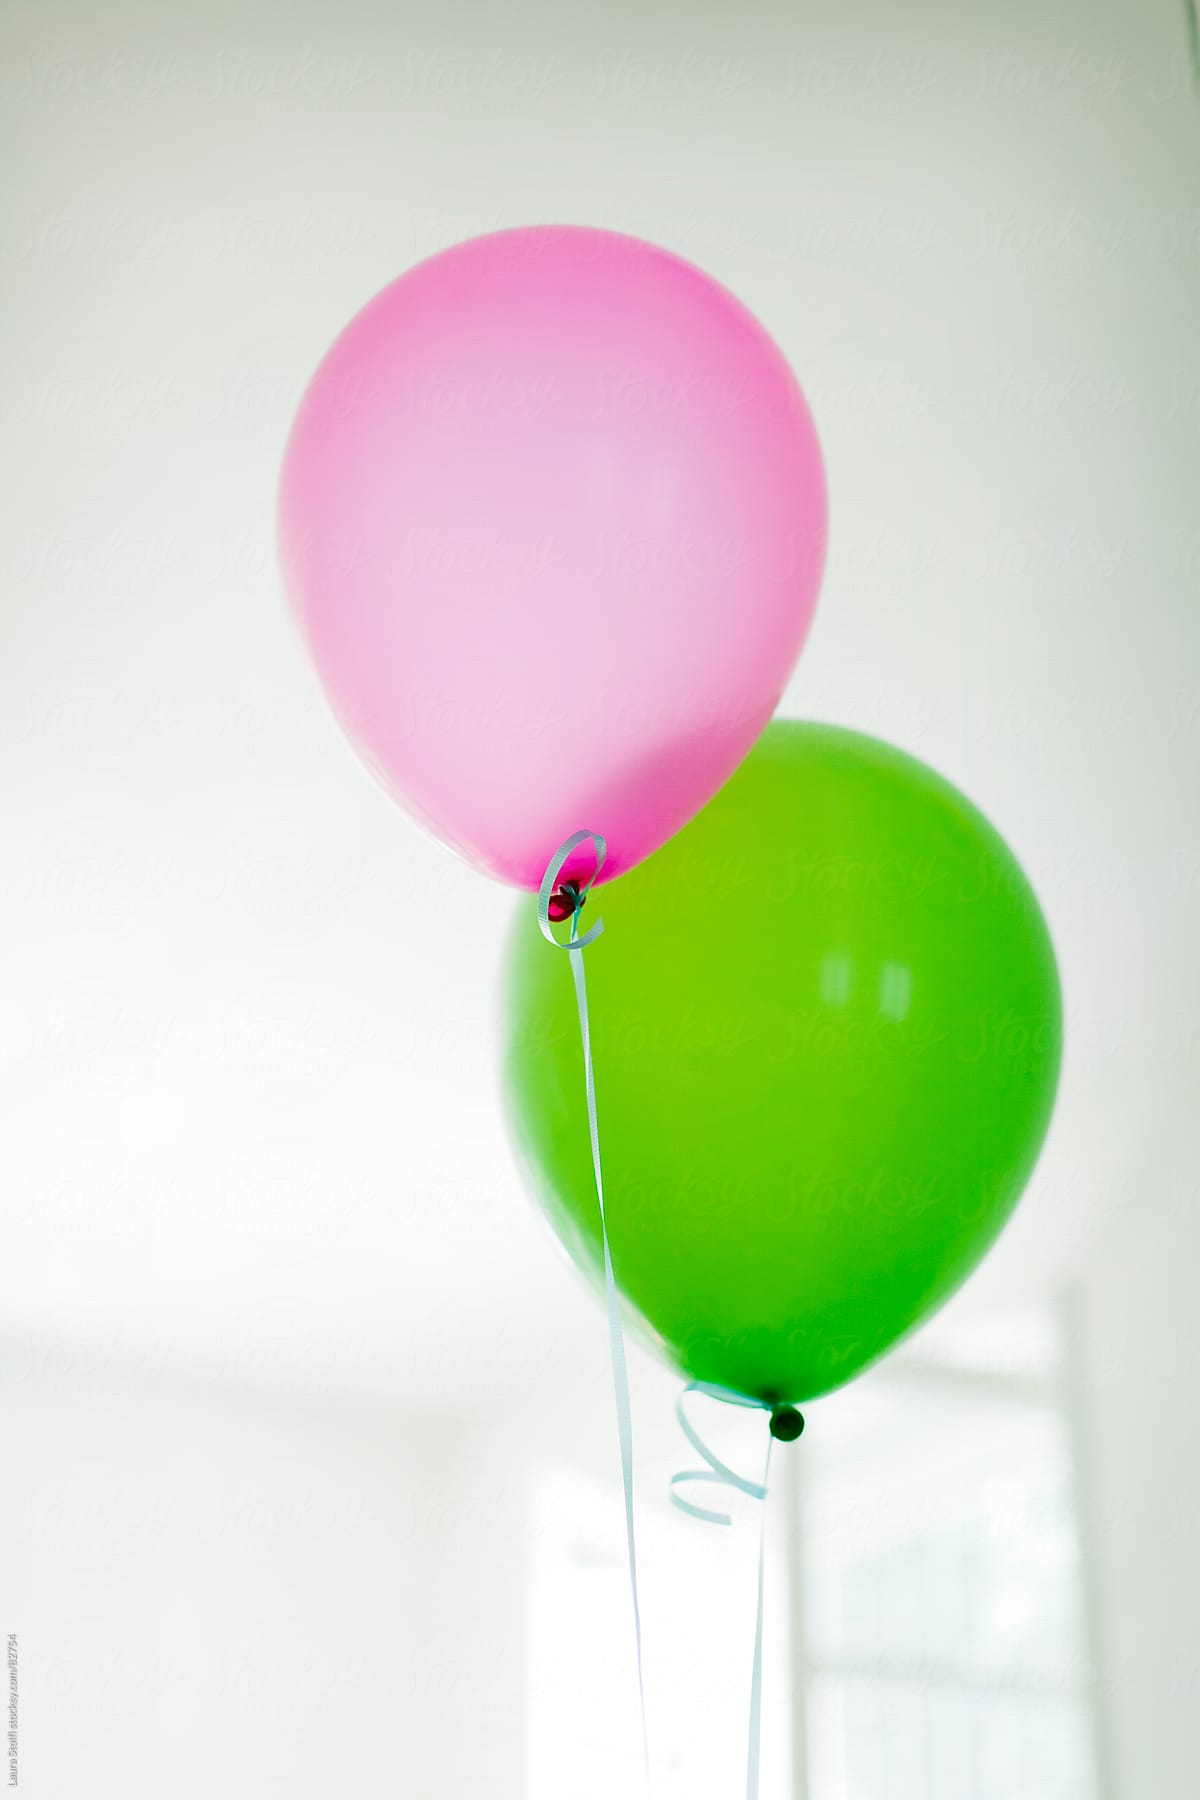 Complementary colours: green and pink balloons together